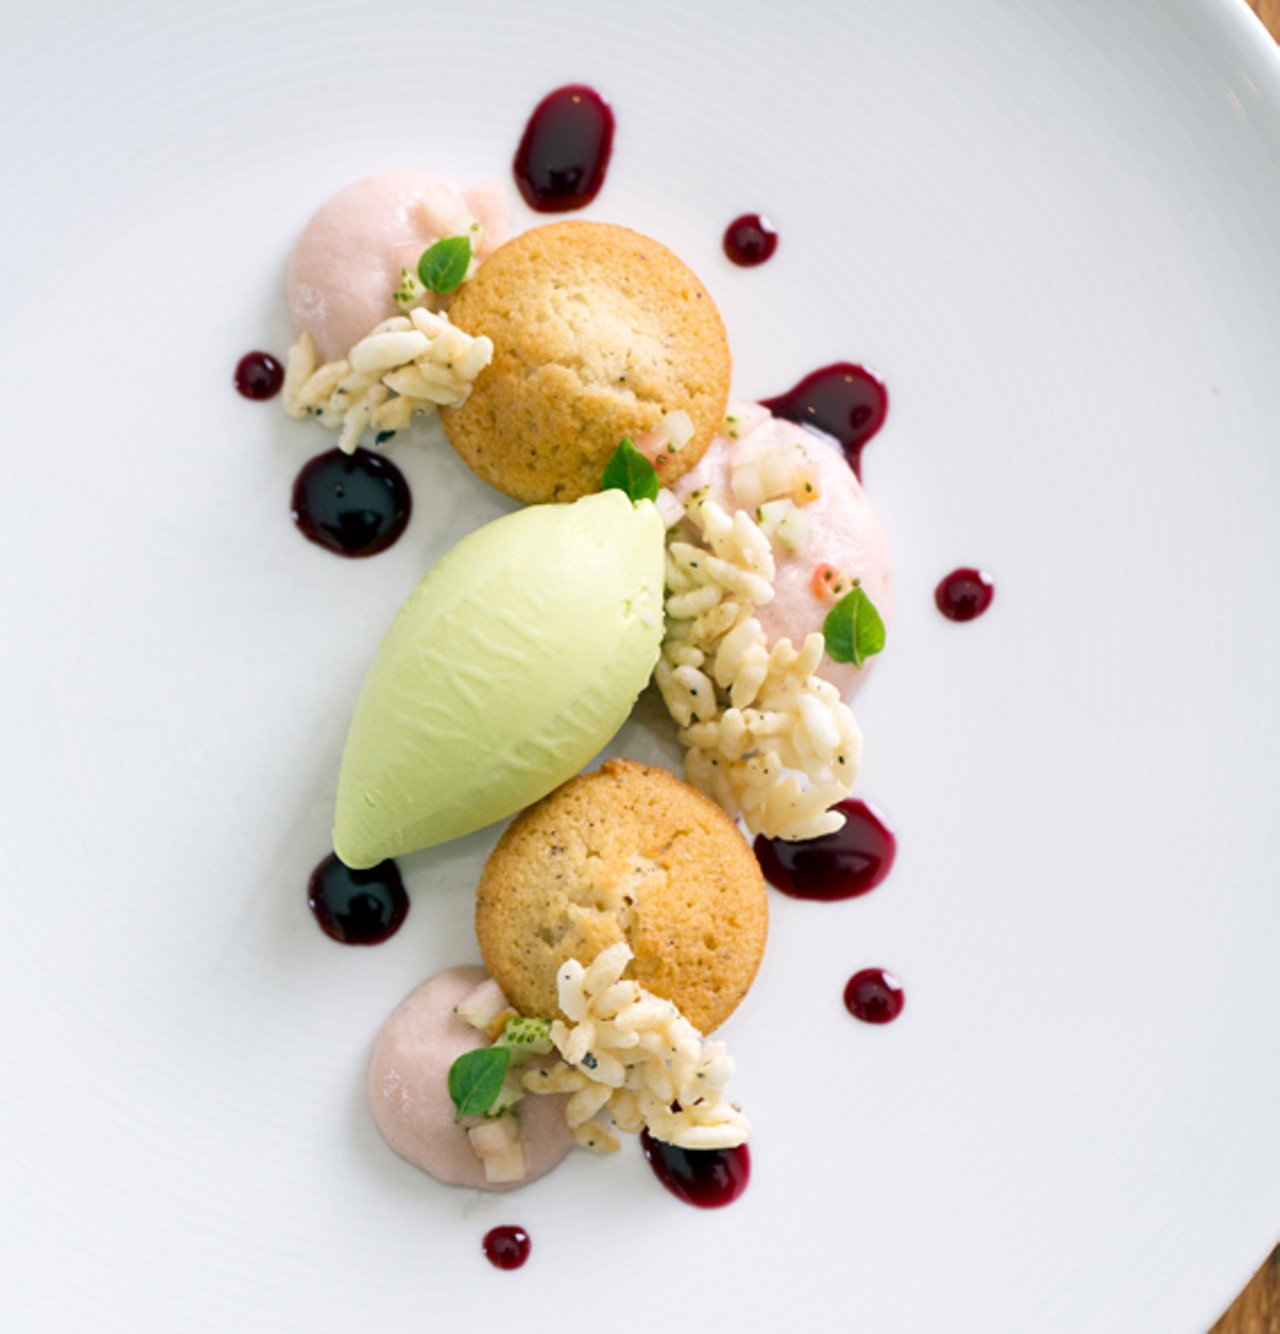 Sweet pea ice cream with financier, strawberry and hibiscus.